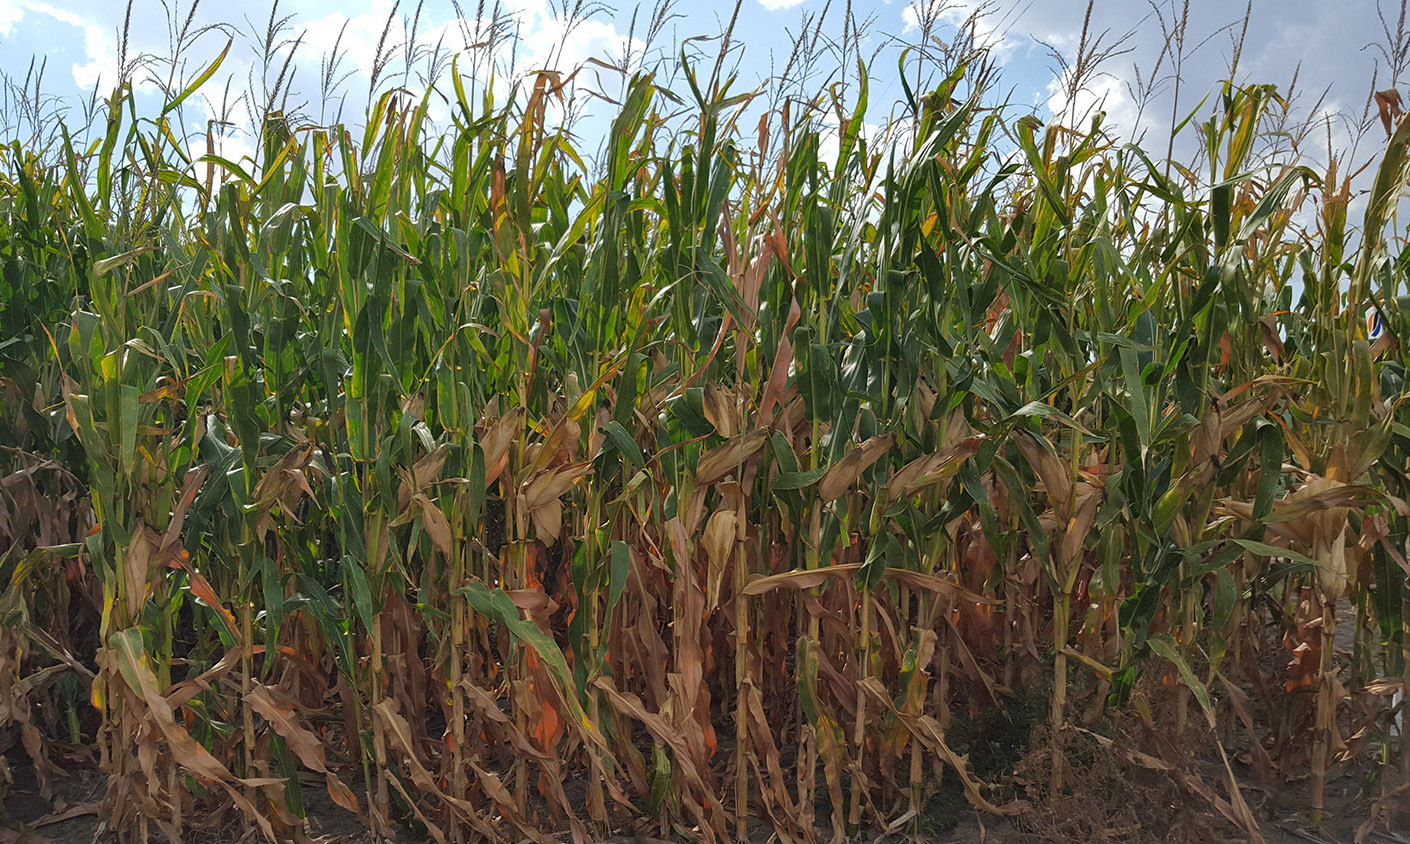 Corn field dying prematurely